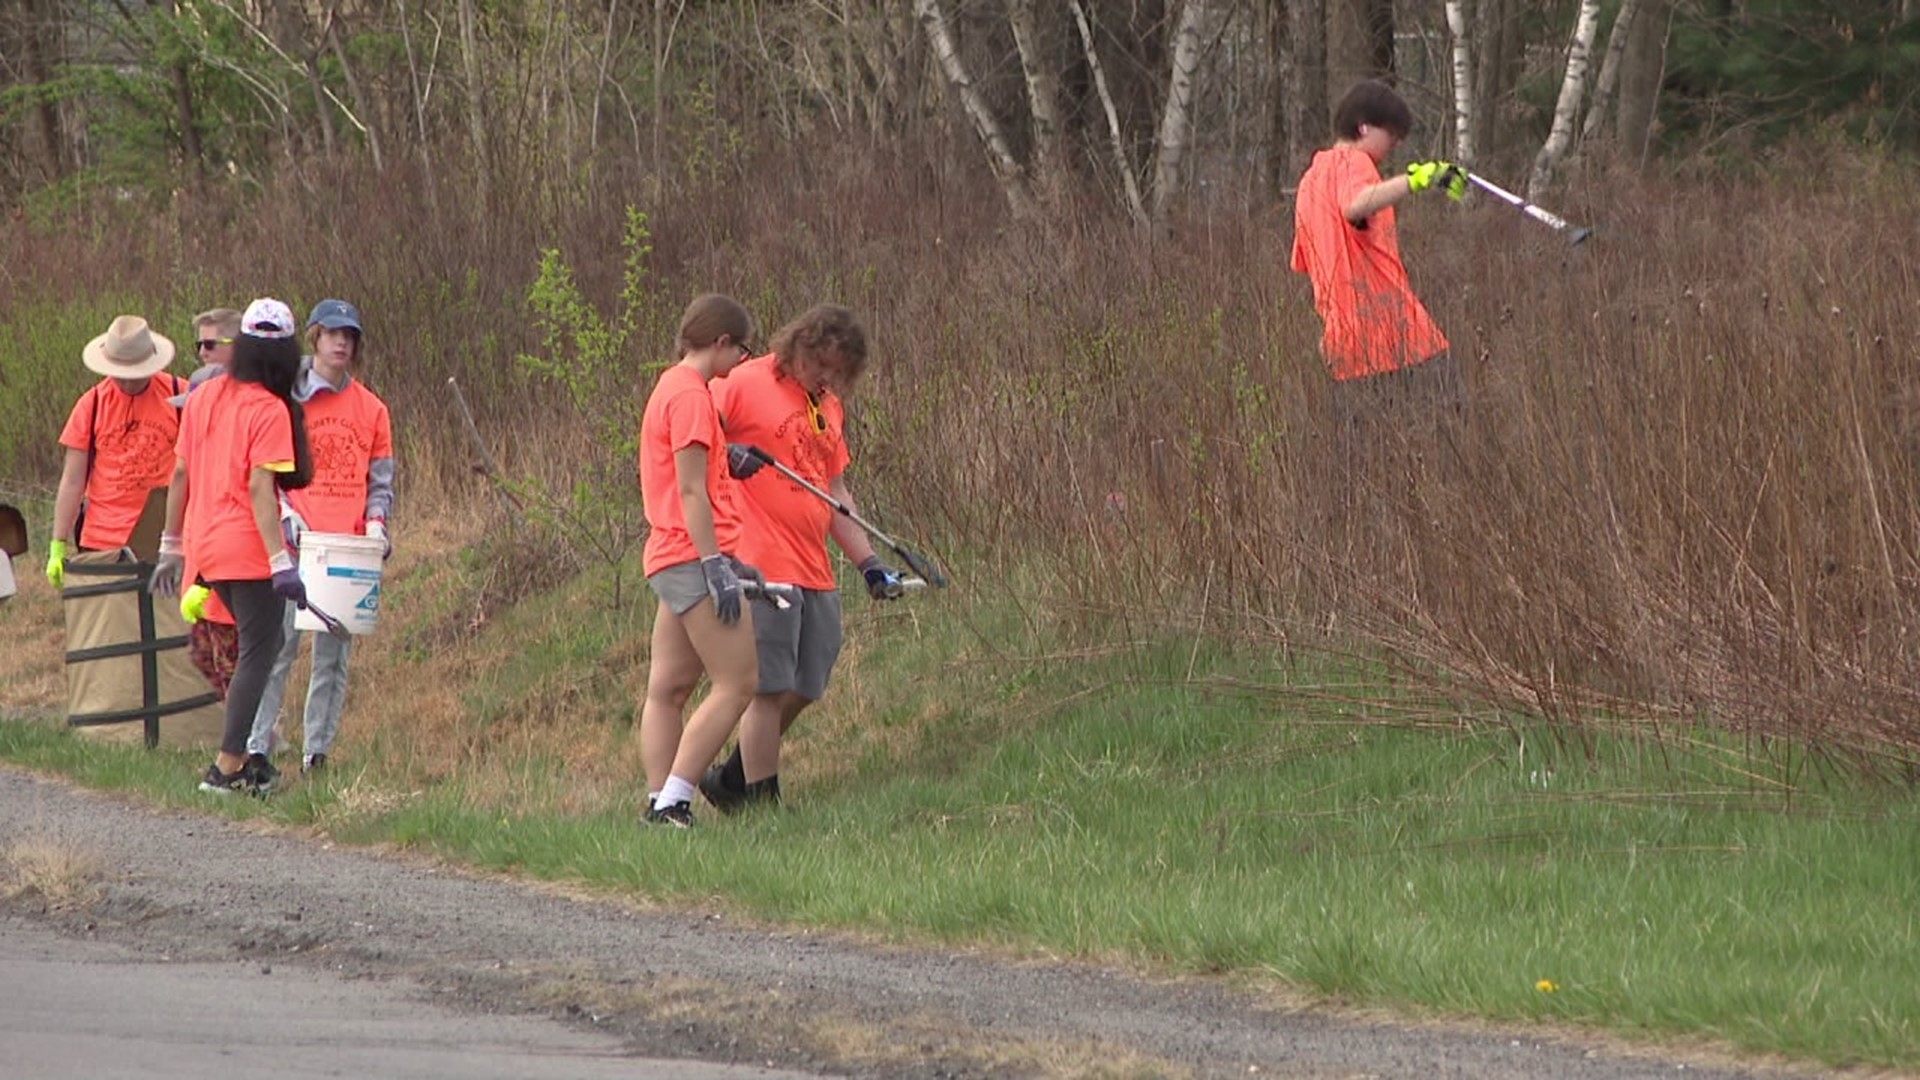 The groups are hoping to meet the goal of picking up 150 bags of litter this spring.